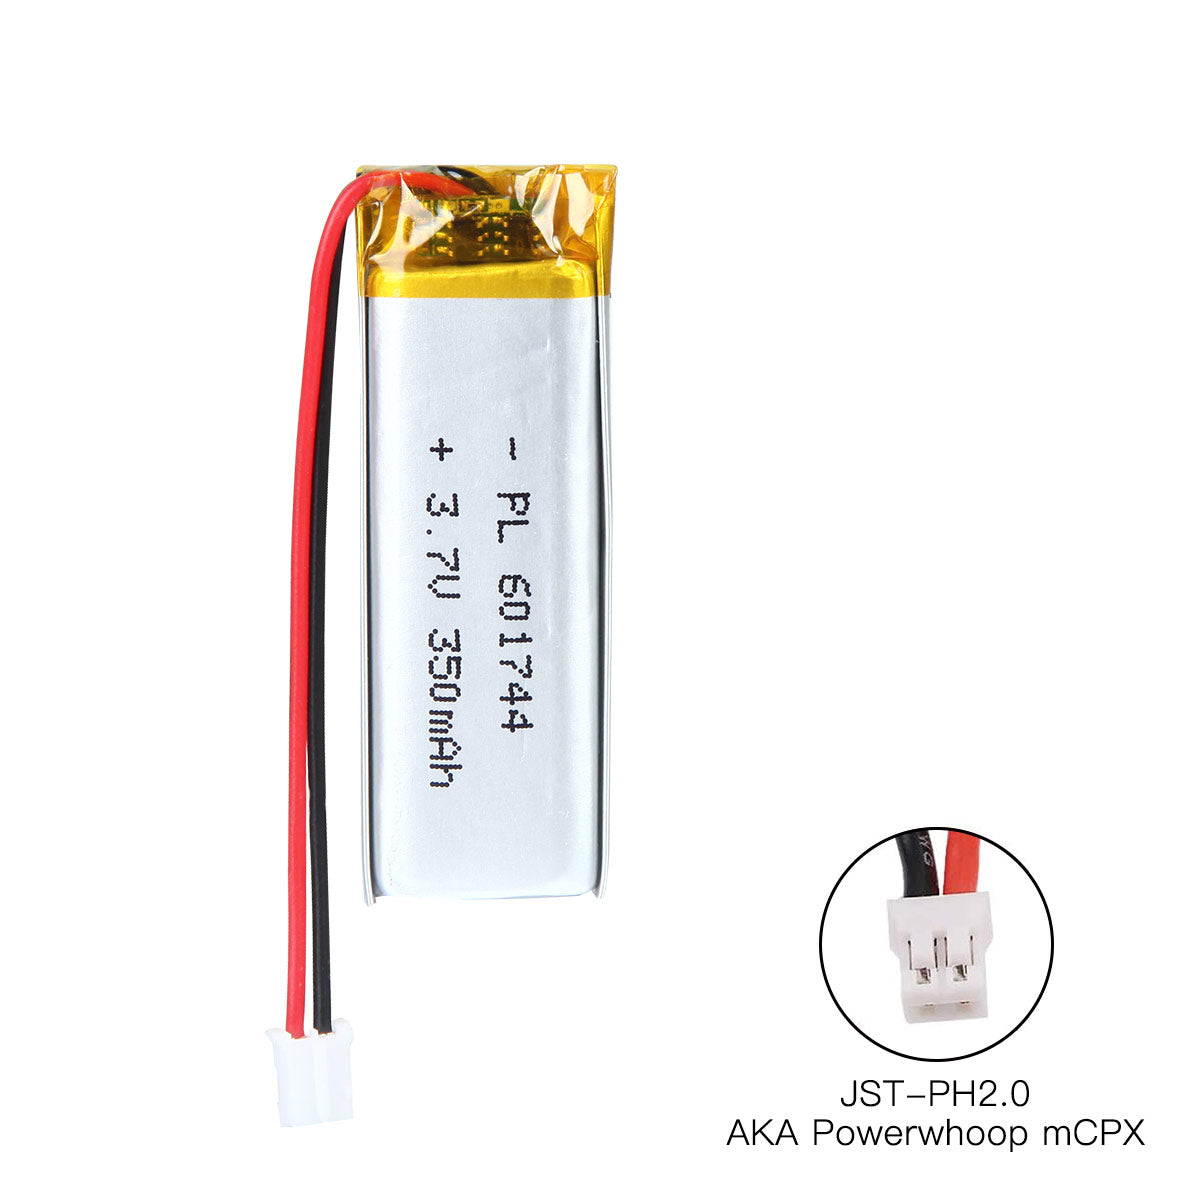 YDL 3.7V 350mAh 601744 Rechargeable Lithium Polymer Battery